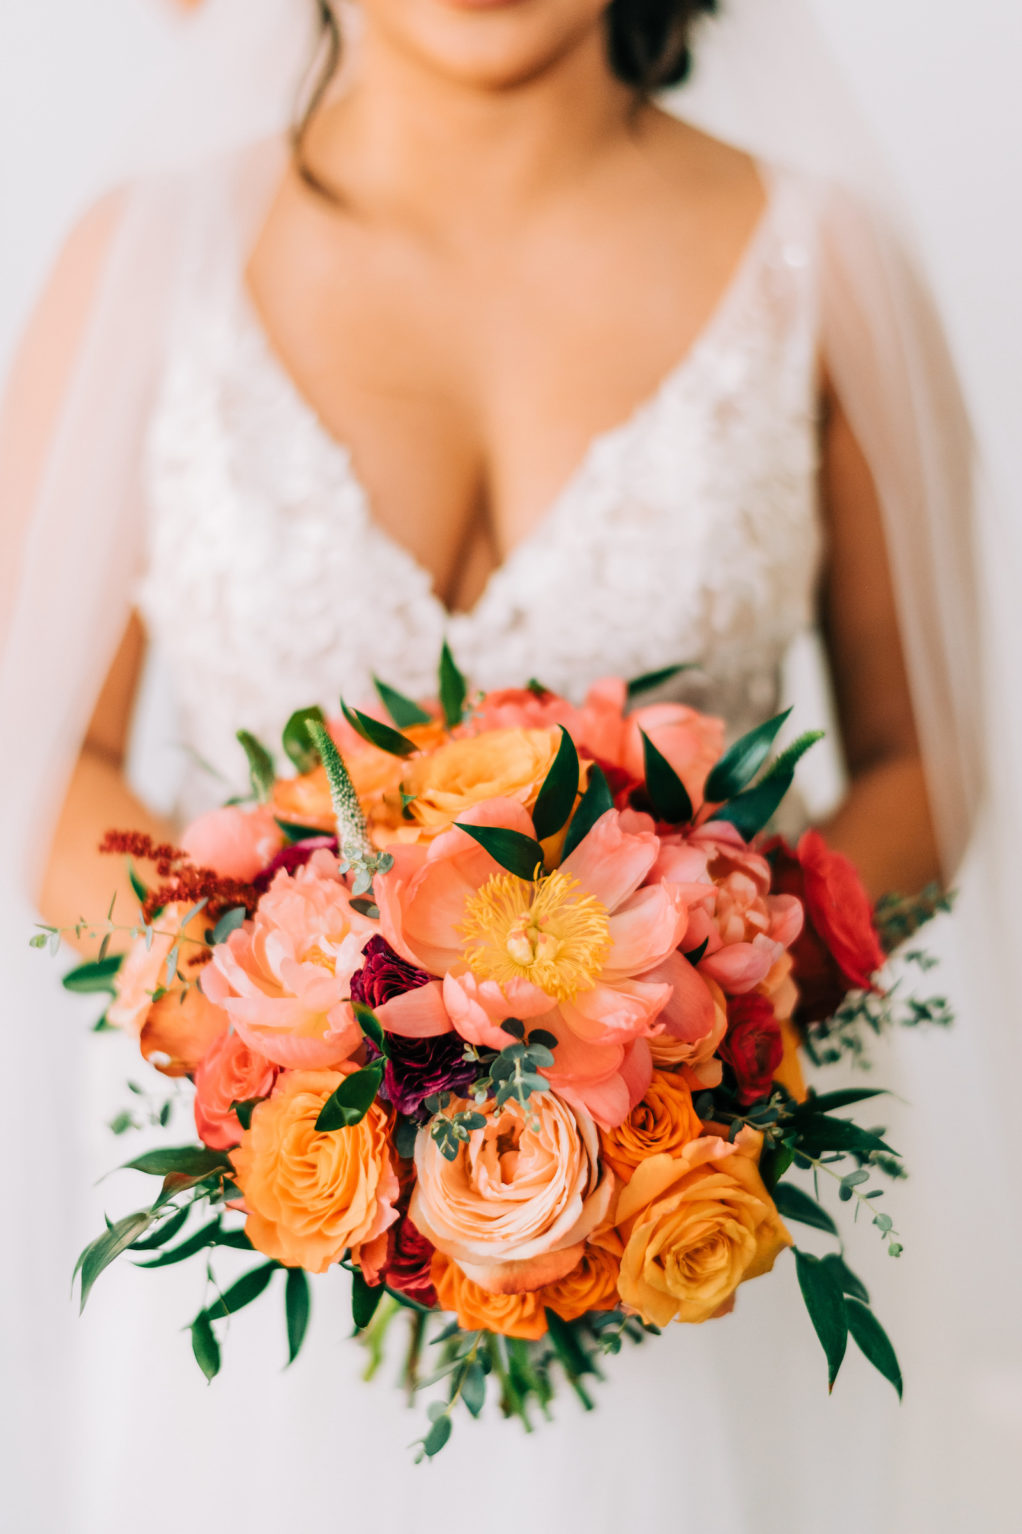 Tampa Bay Bride in V Neckline Lace Wedding Dress Holding Vibrant Colorful Pink and Orange Roses Floral Bouquet | Wedding Florist Monarch Events and Design